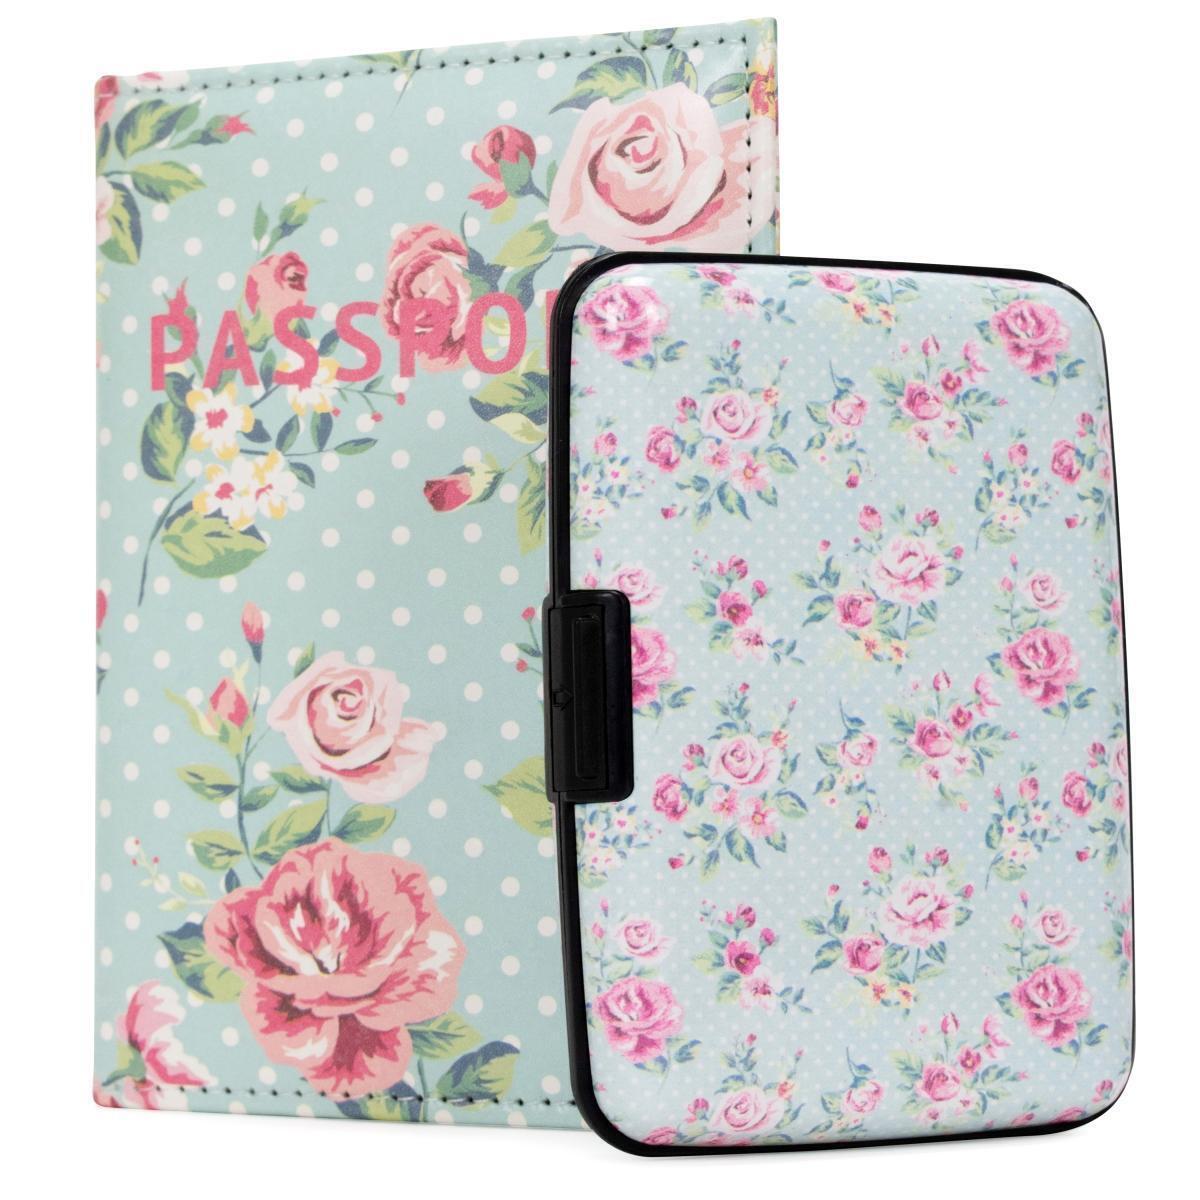 Miami CarryOn RFIDWSVTRS RFID Protected Wallet and Passport Cover Set (Vintage Roses)